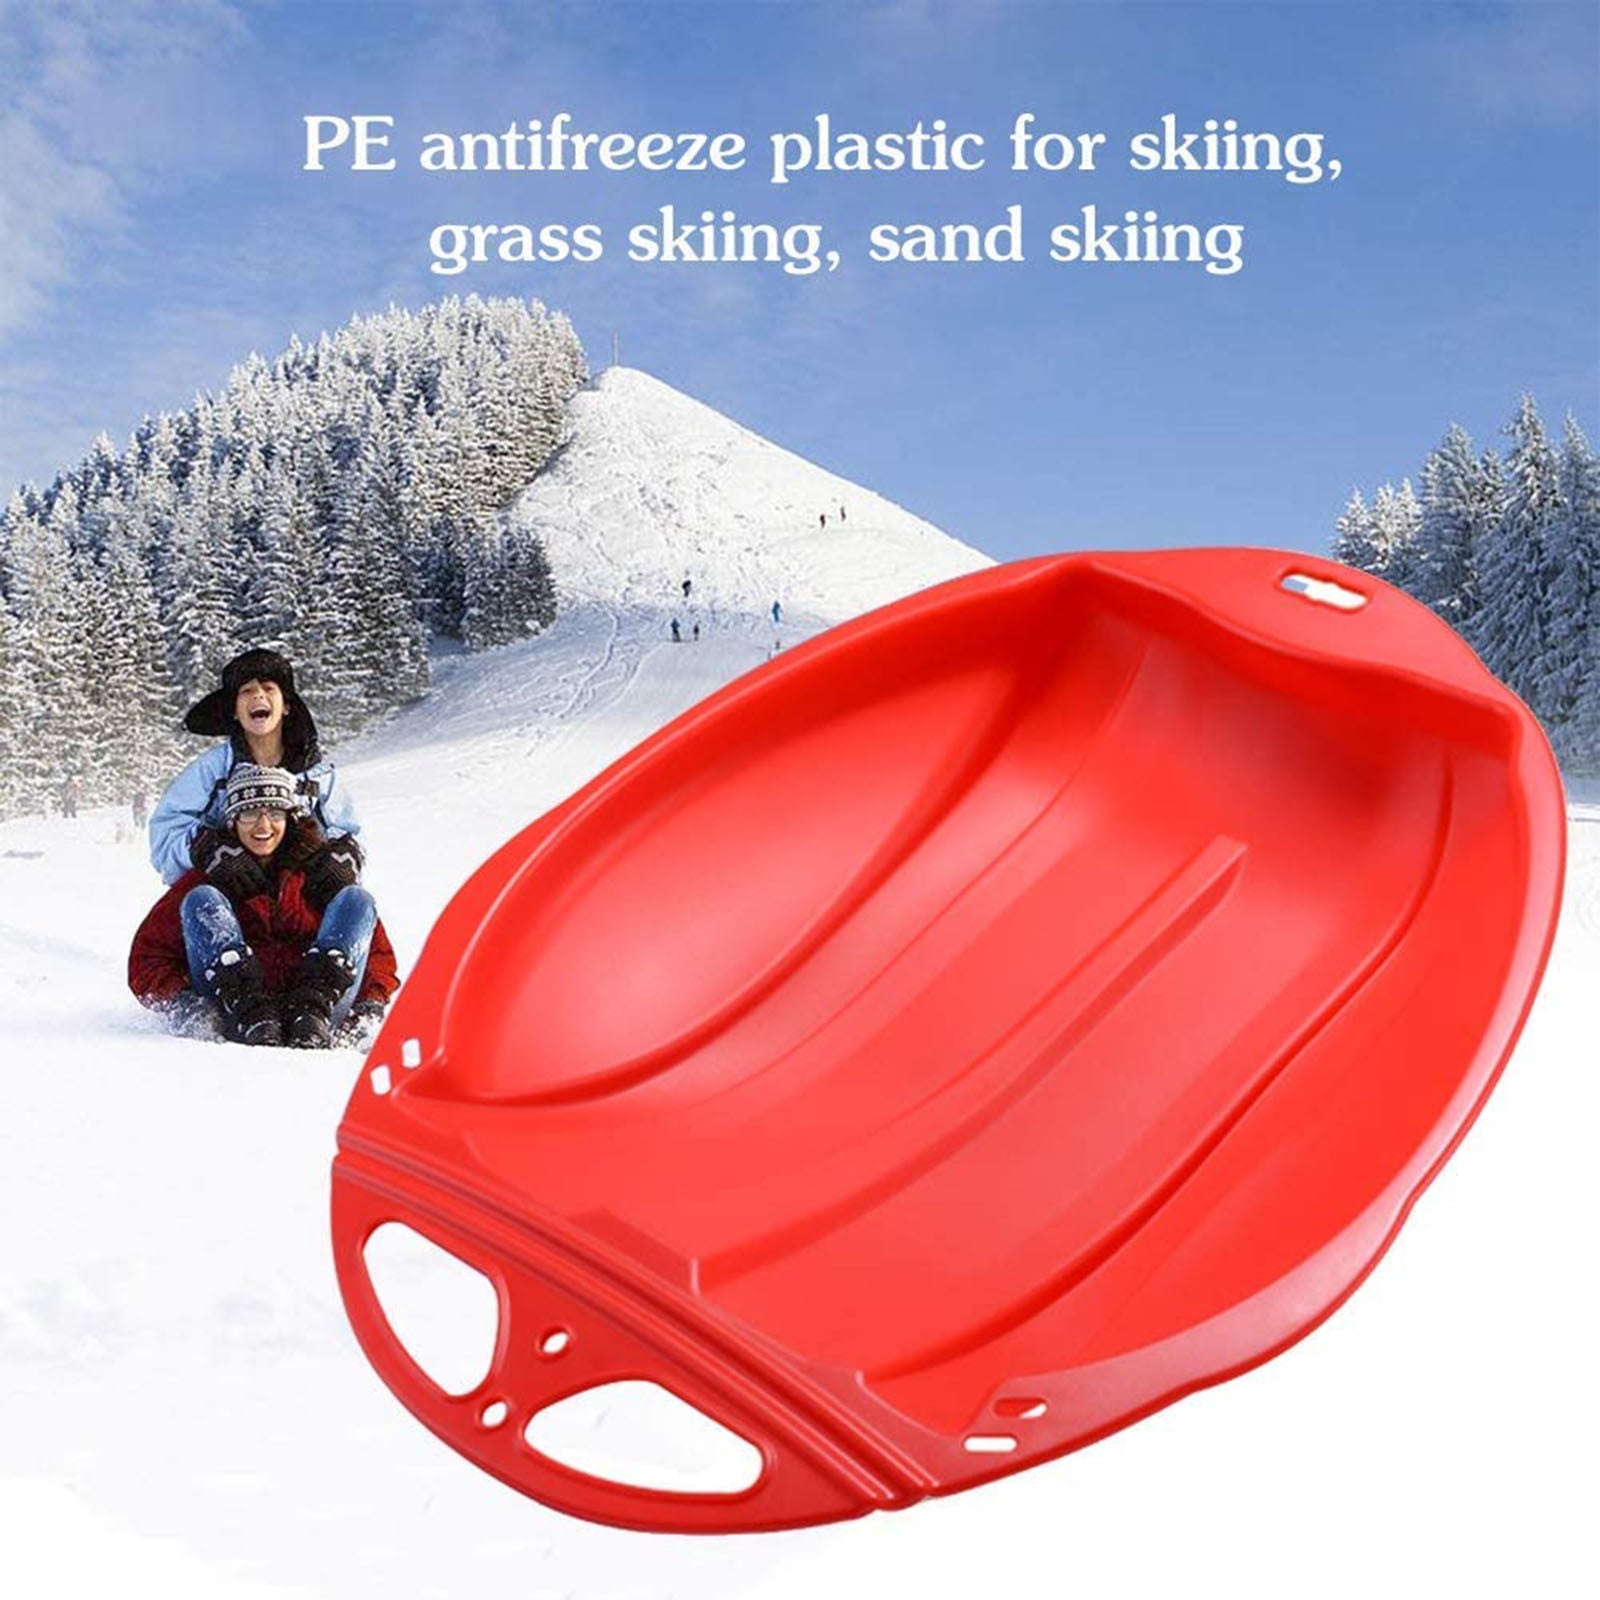 decwang 1-2pcs Snow Sled Board for Kids Adult,Snow Sled Portable Thicken Snow Sled Sledge Ski Board Sleigh,Outdoor Winter Plastic Skiing Boards Snow Grass Sand Board Ski Pad Snowboard Sled Luge 